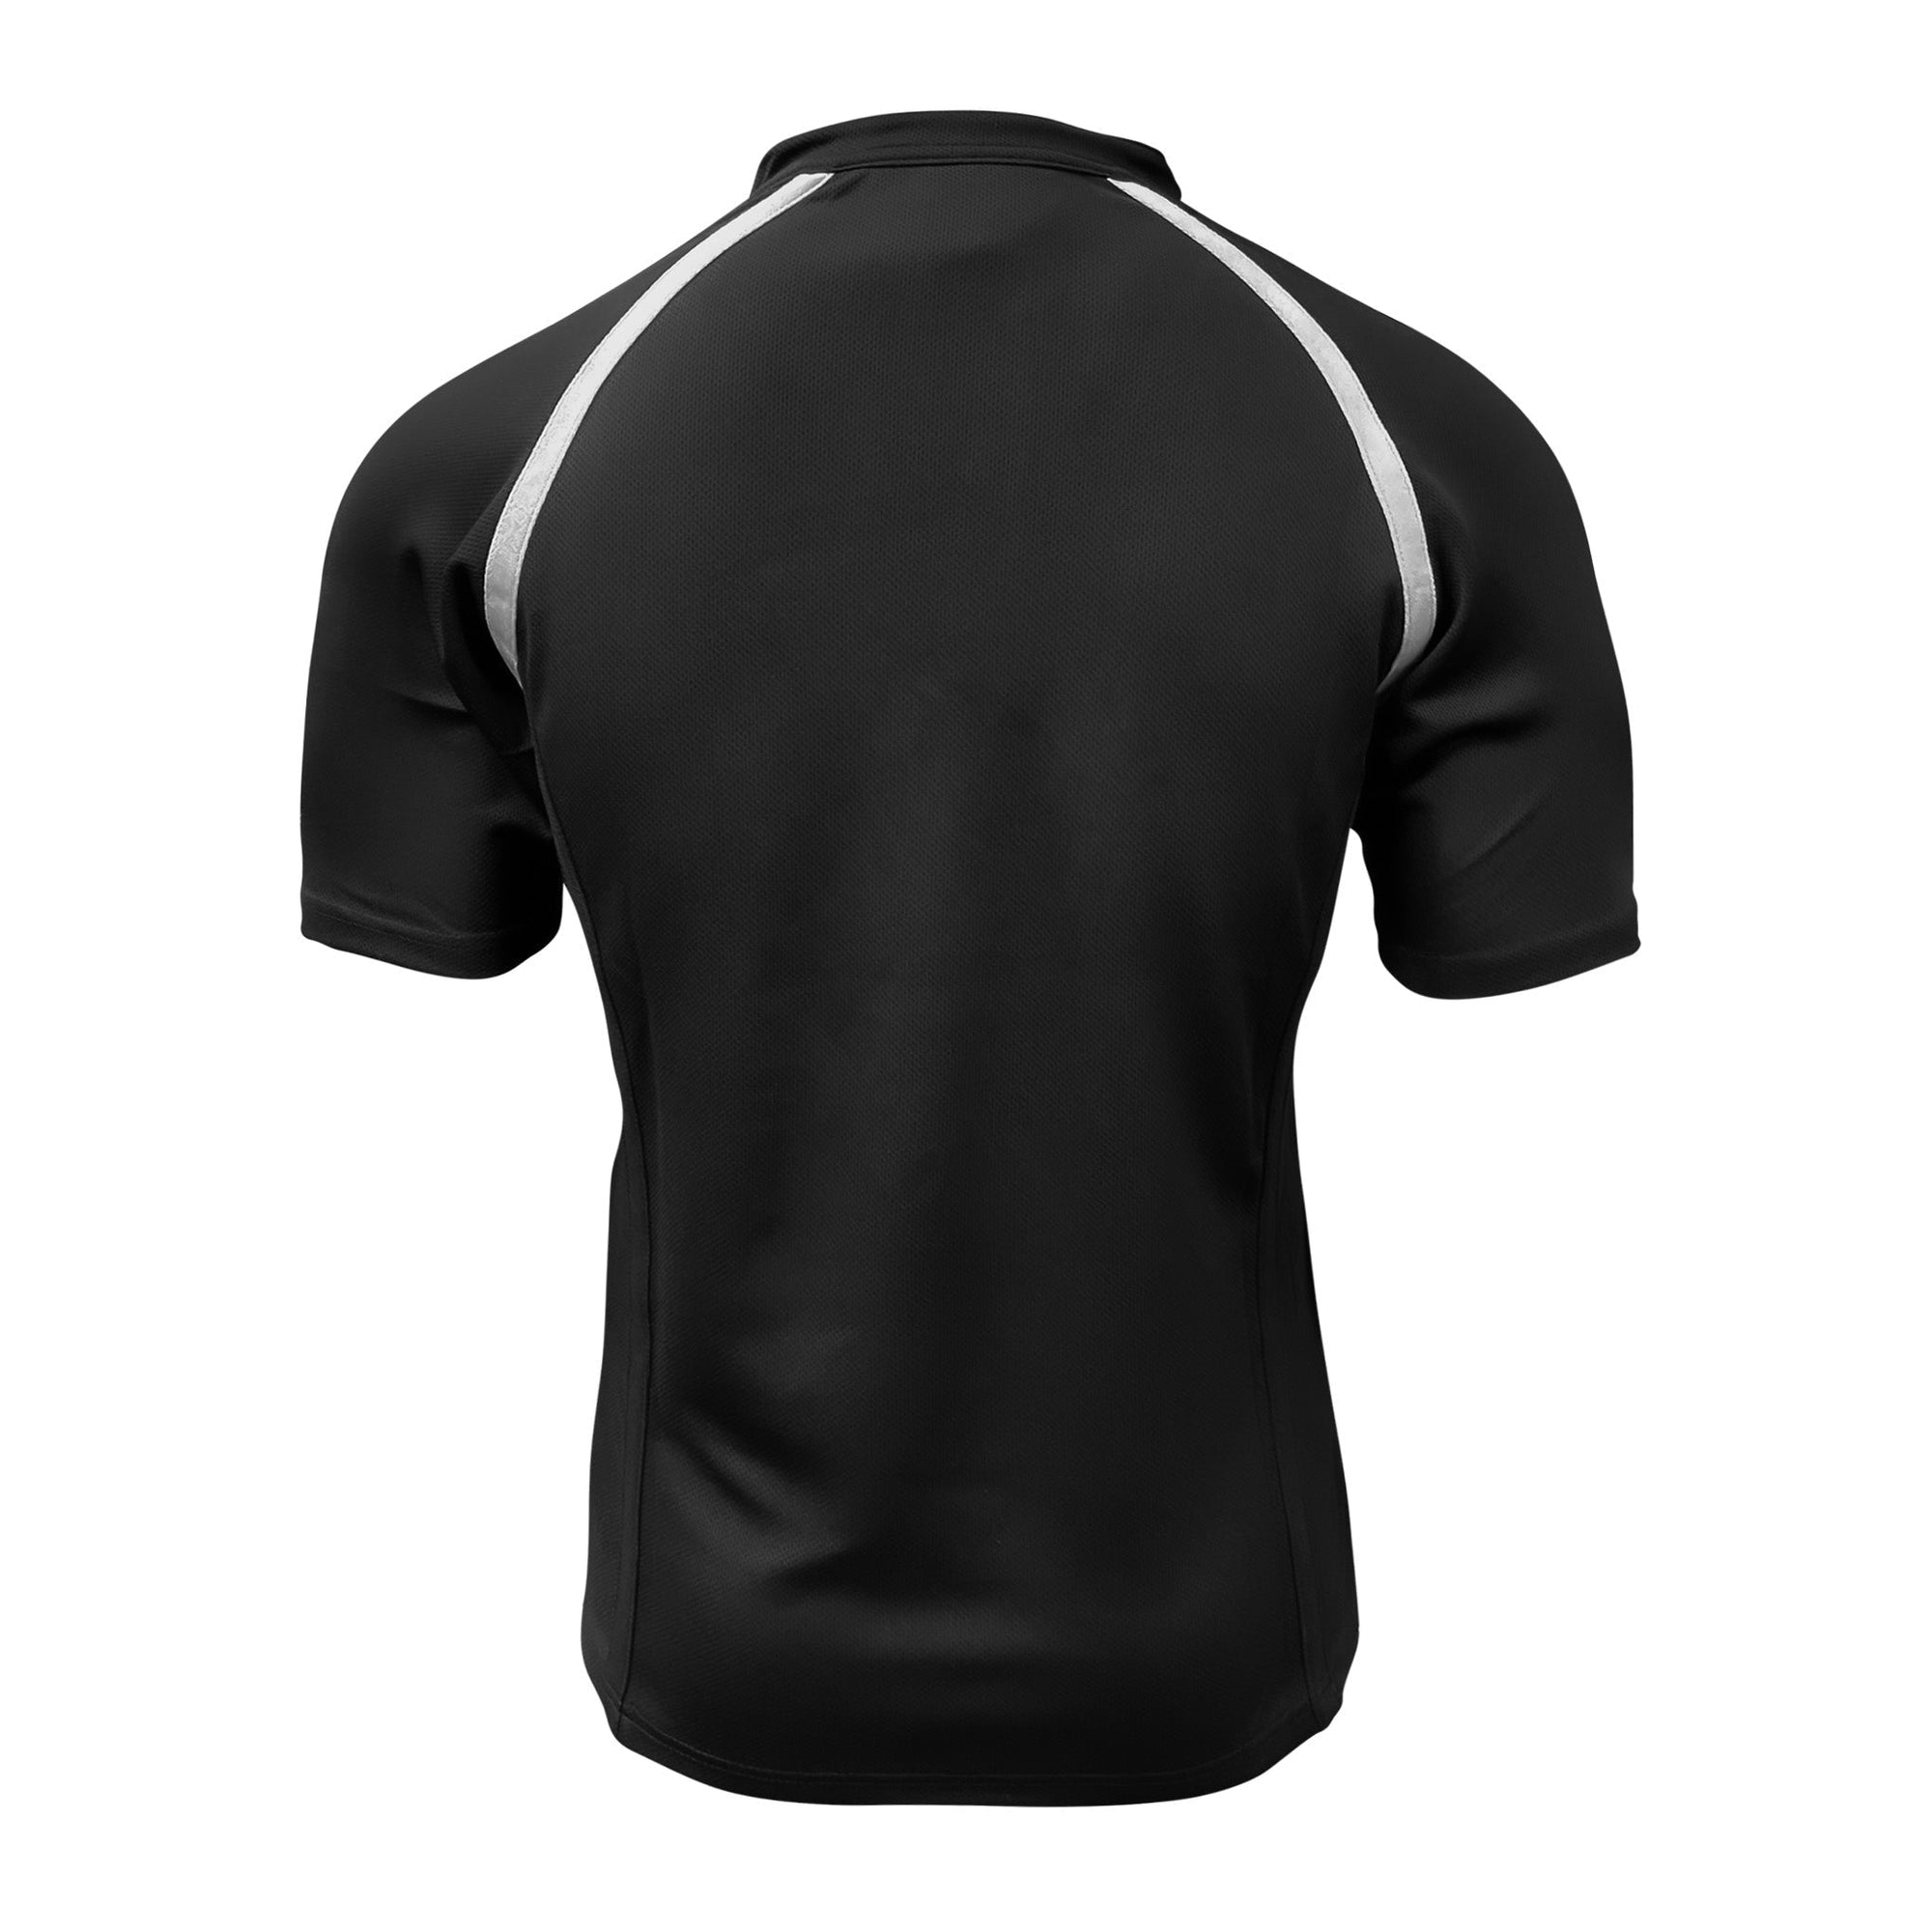 Rugby Imports Wake Forest XACT II Jersey